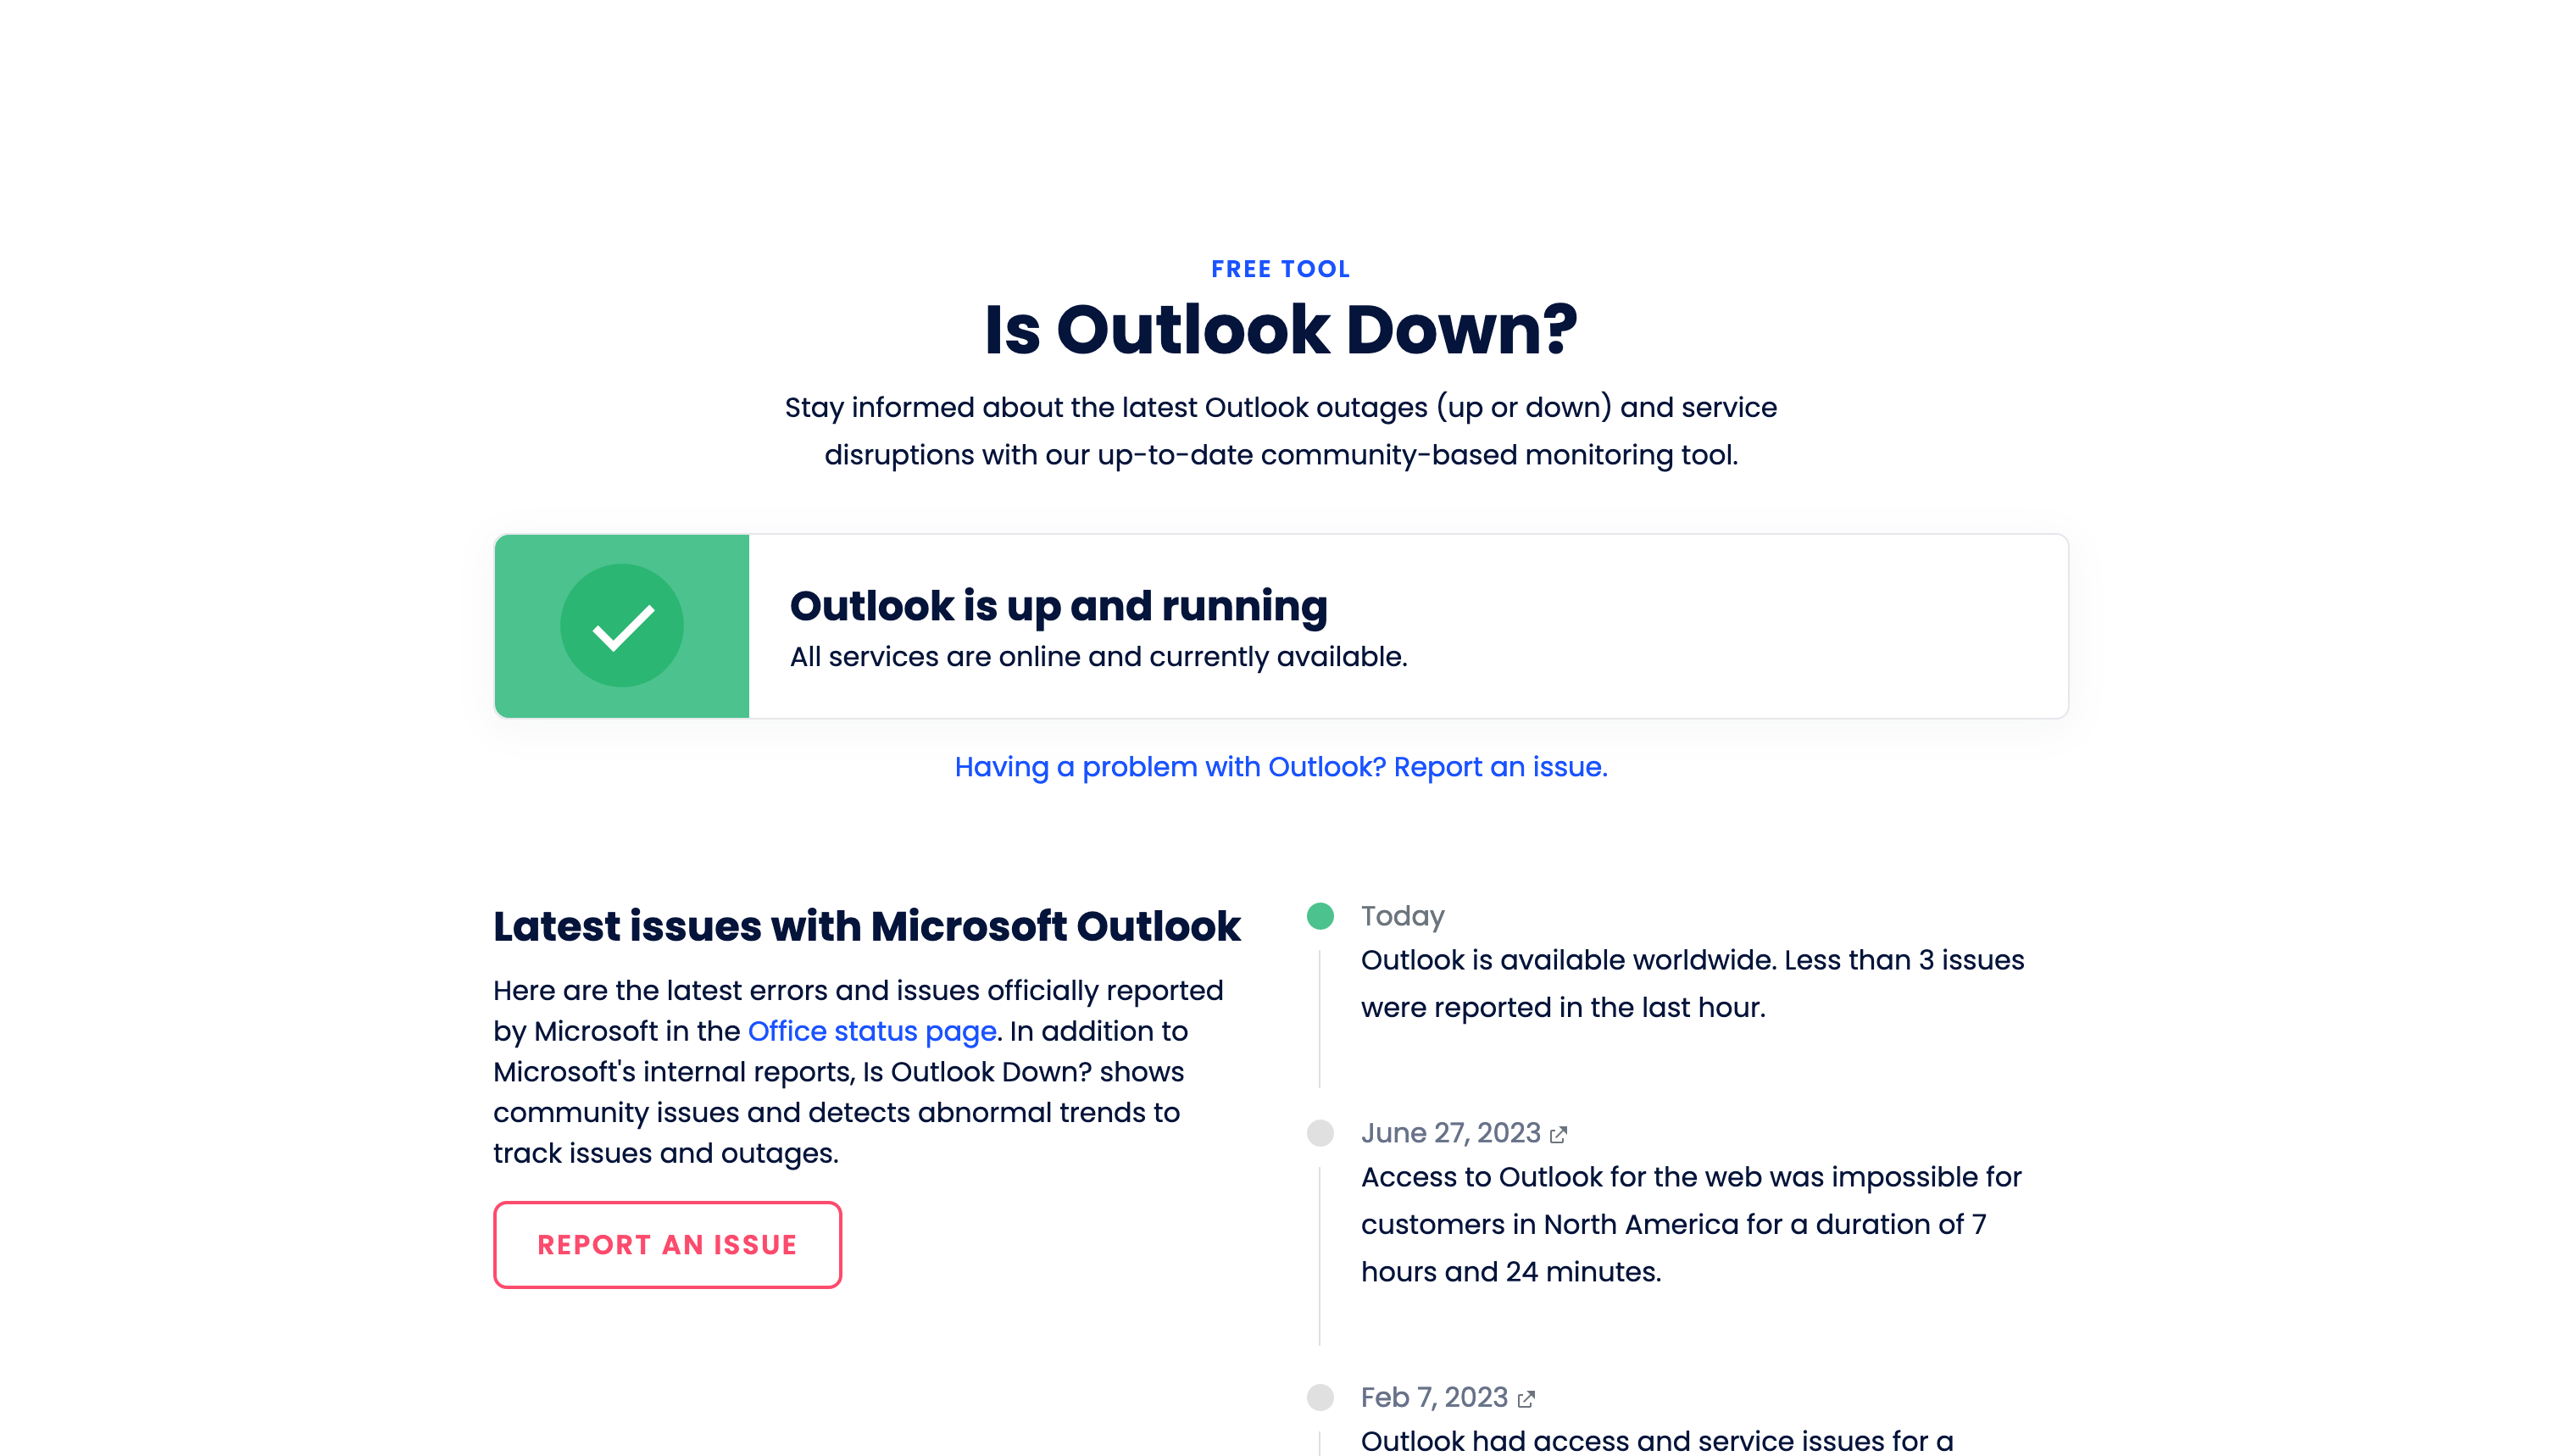 Is Outlook Down?